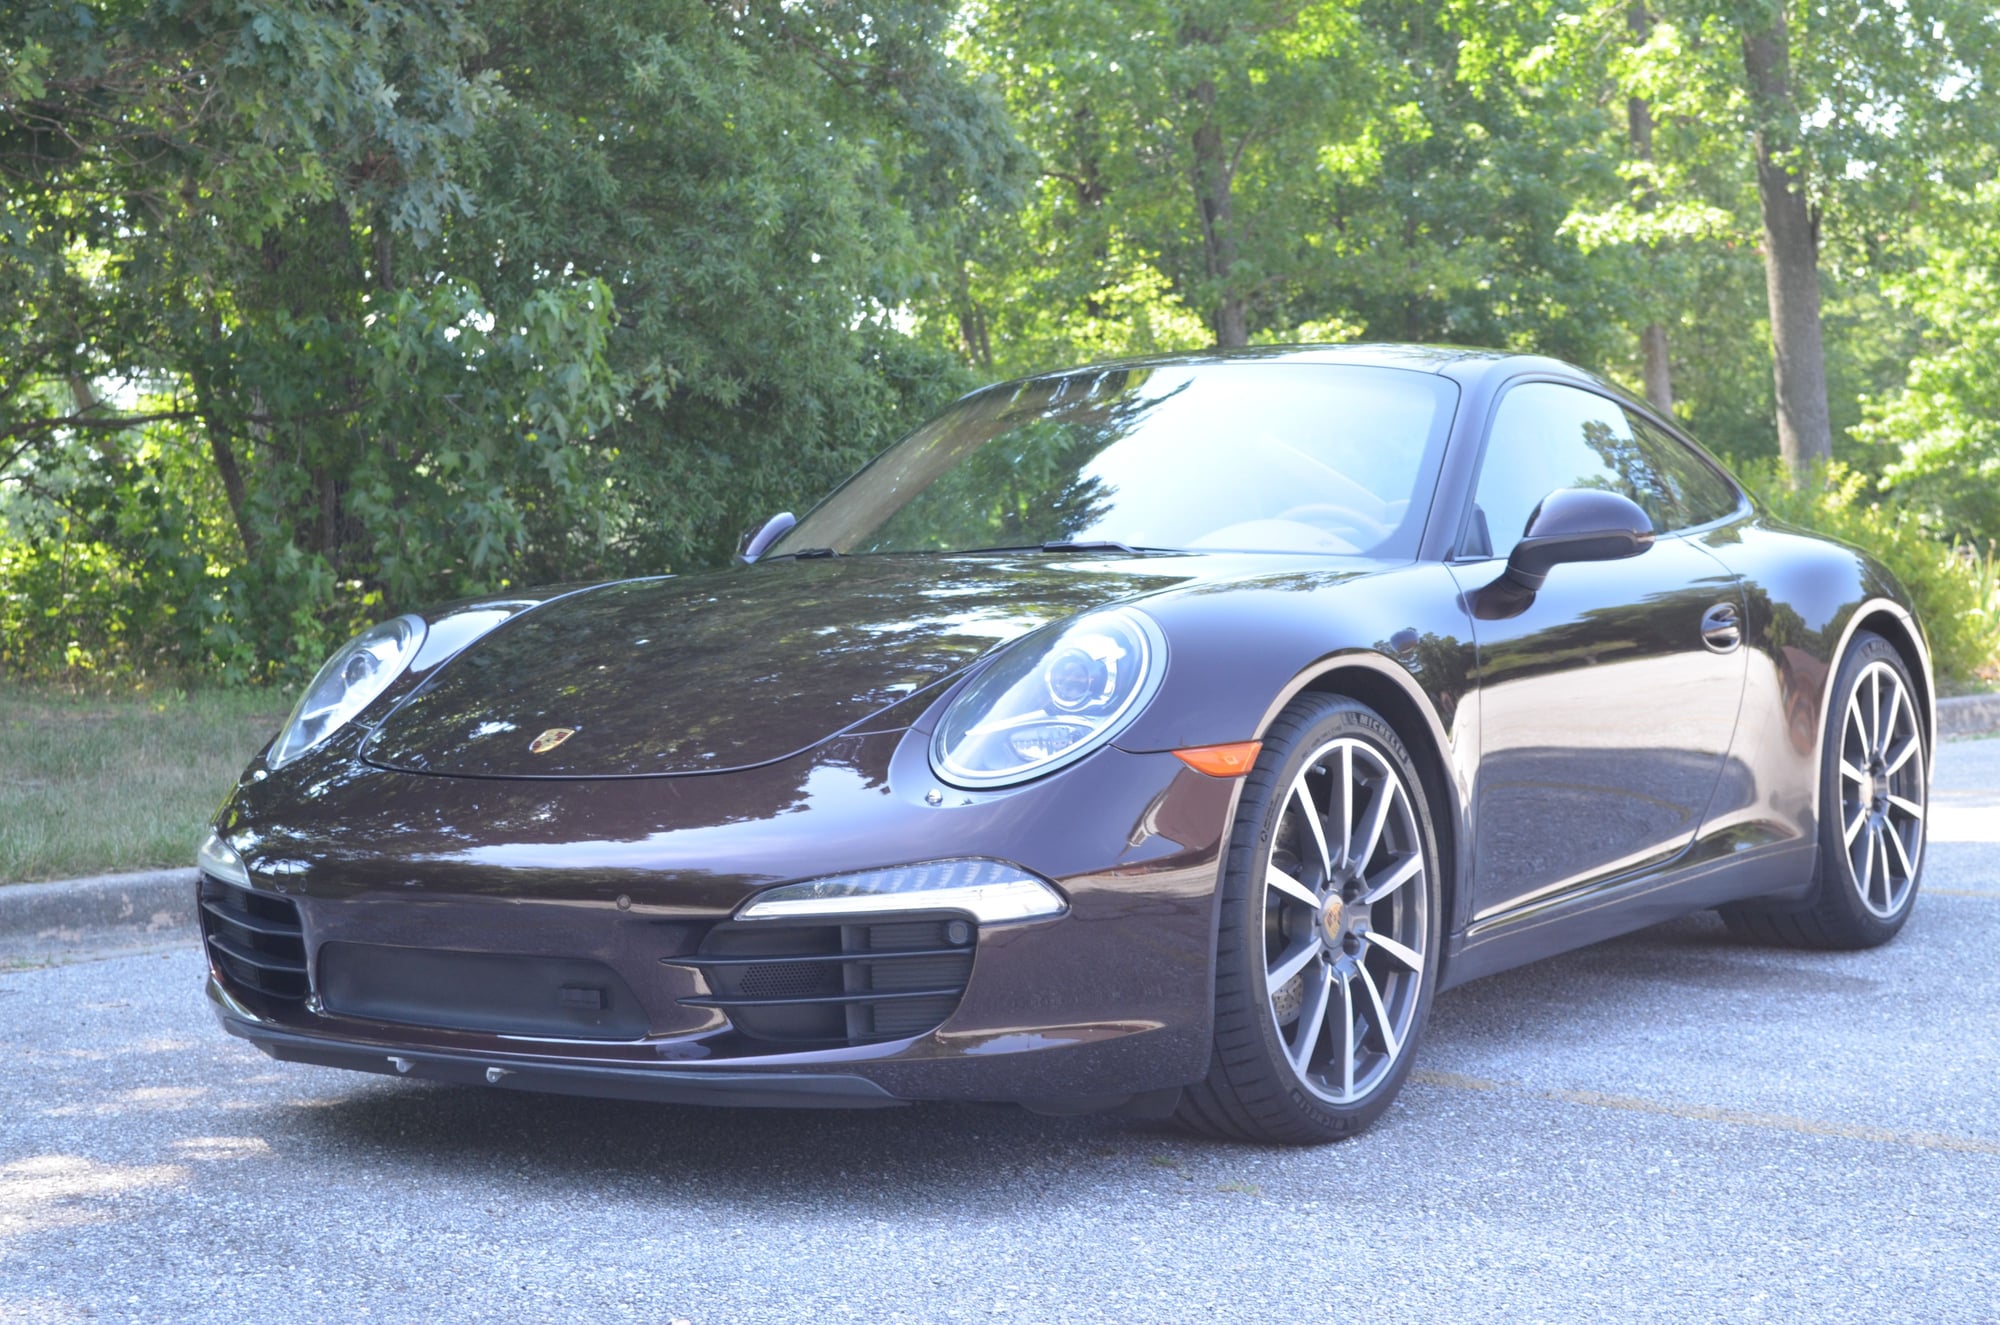 2013 Porsche 911 - 2013 Porsche 991.1 C2 PDK - Last of the naturally aspirated Carreras! - Used - VIN WP0AA2A96DS106568 - 69,500 Miles - 6 cyl - 2WD - Automatic - Coupe - Brown - Bowie, MD 20720, United States